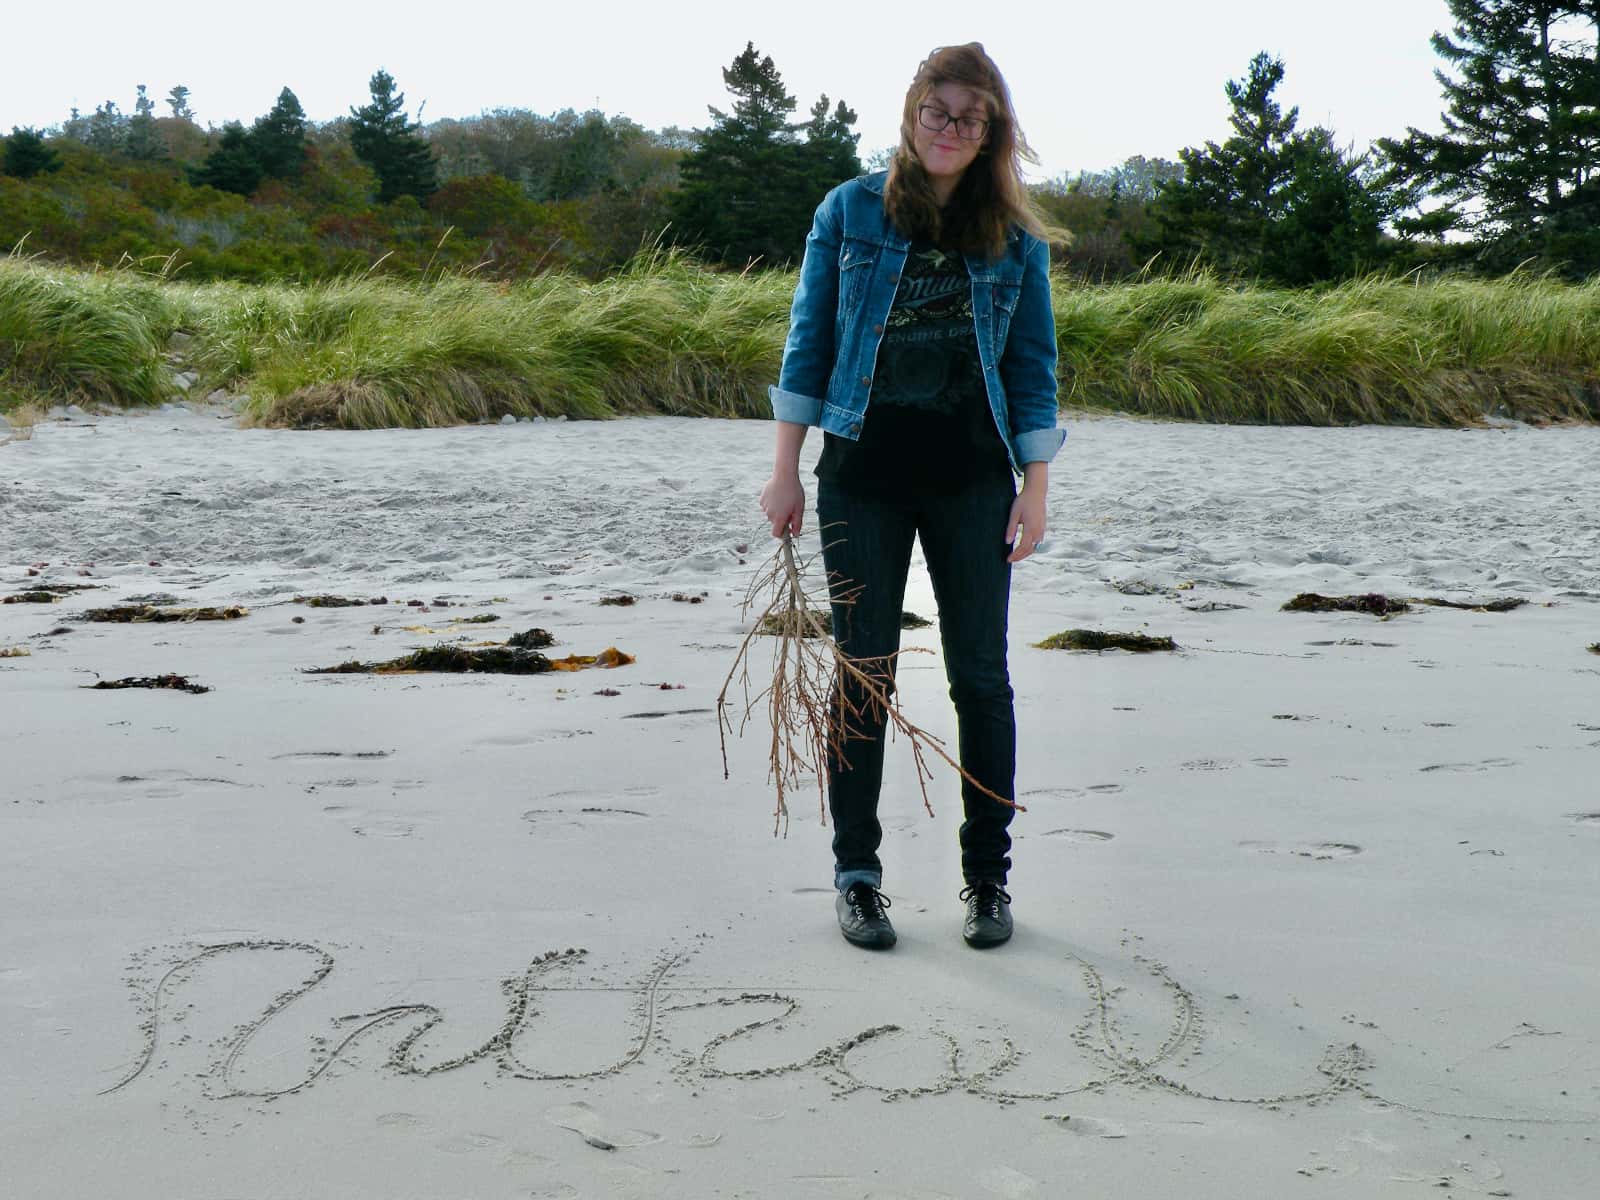 Woman standing on beach with design drawn in sand